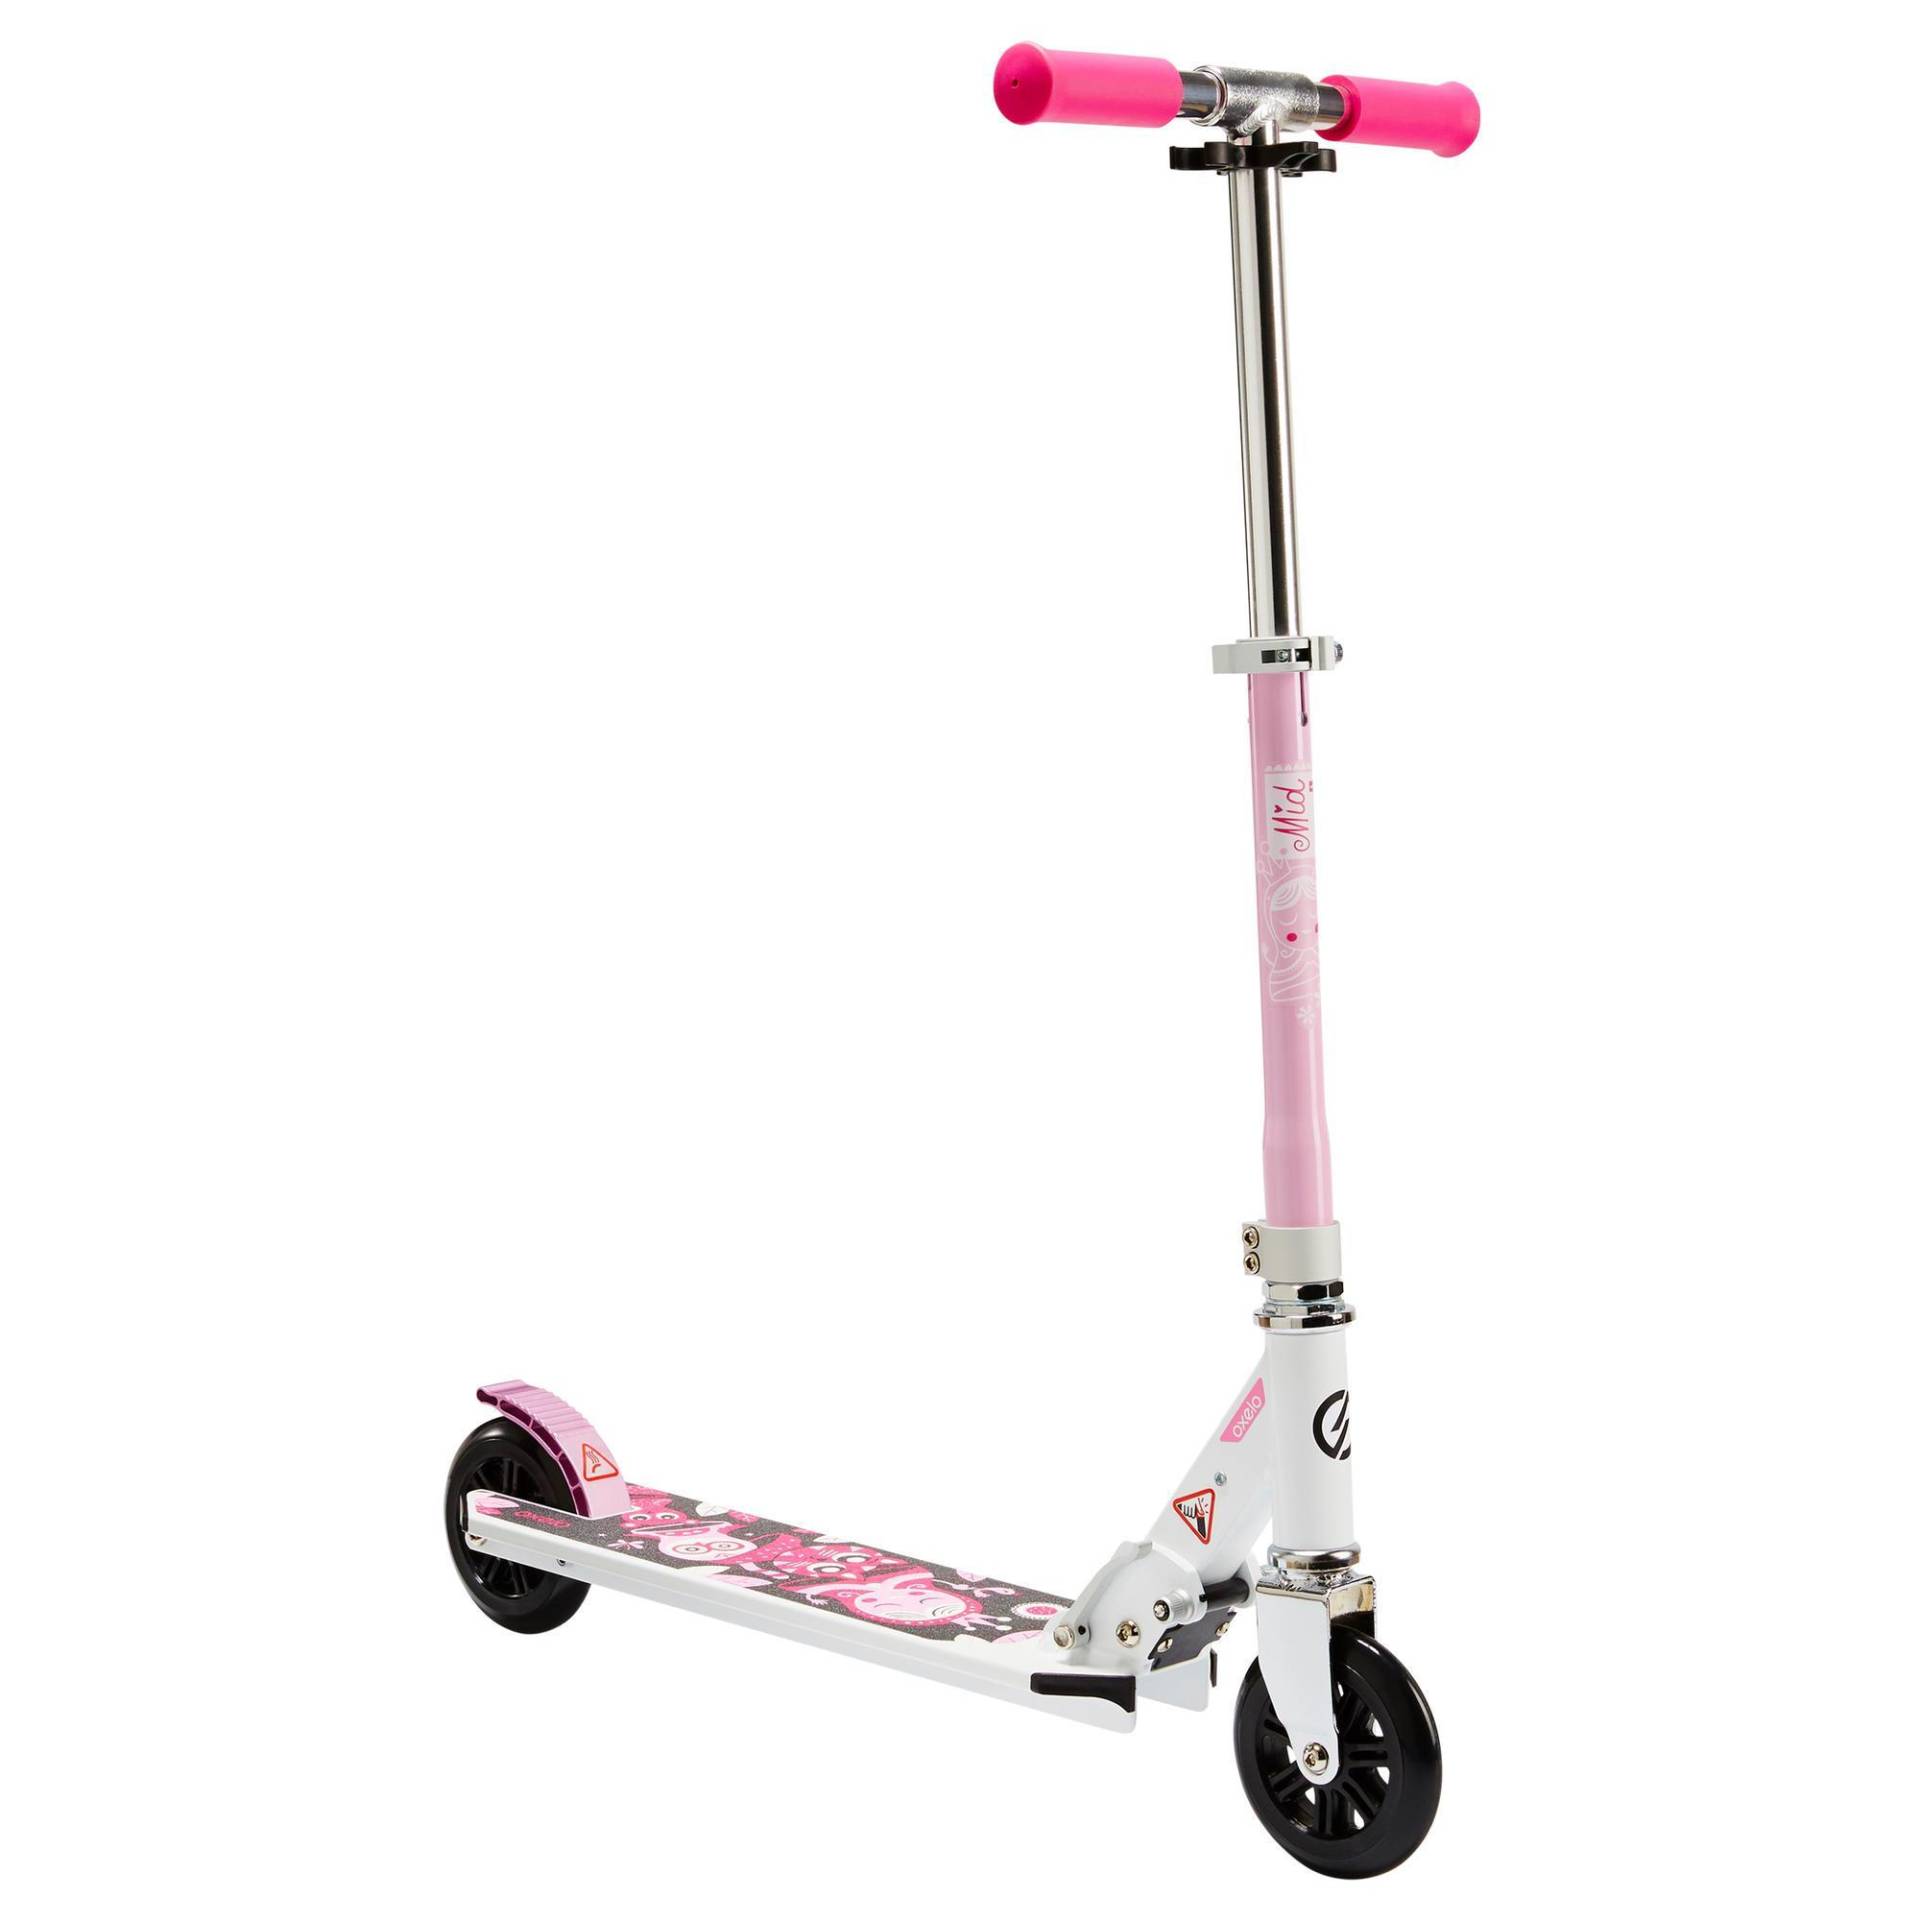 Scooter Roller Kinder Mid 1 weiss/rosa von OXELO